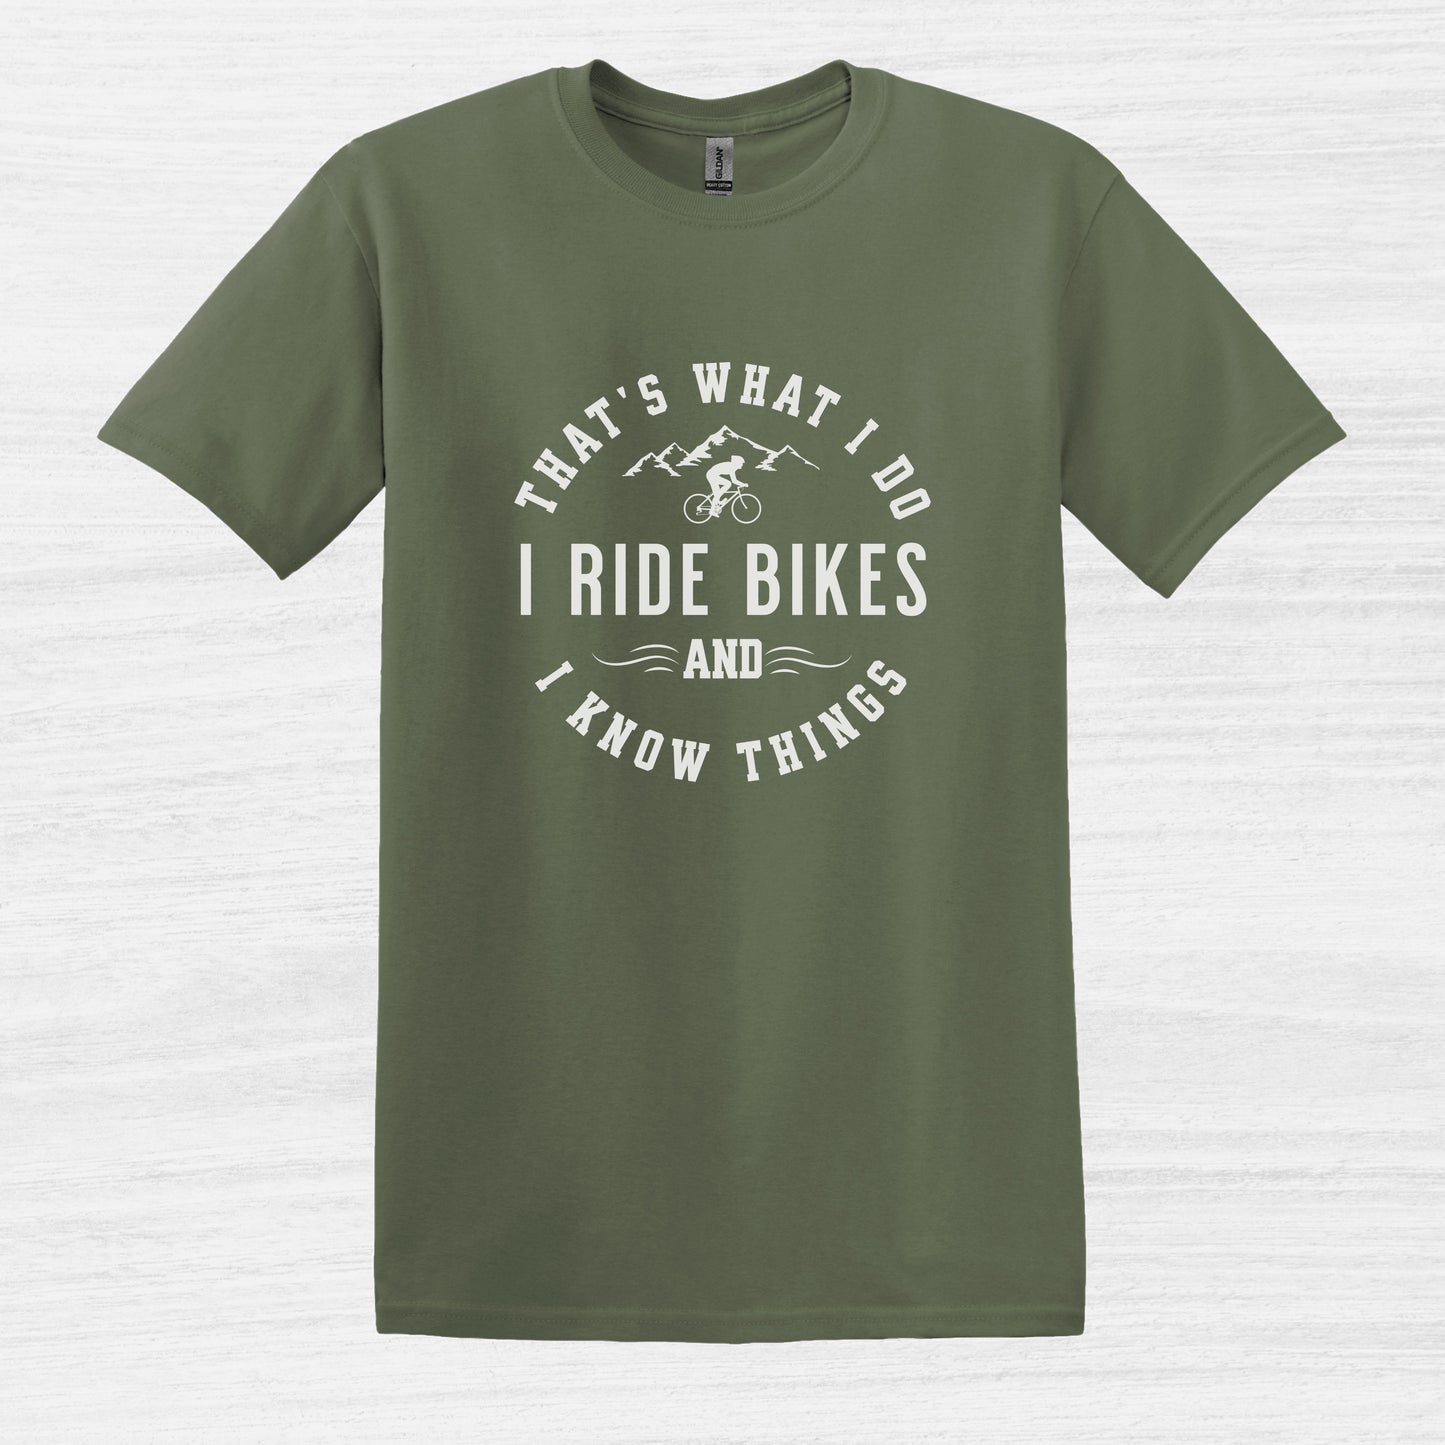 Bike Bliss I Ride Bikes and I know Things MTB T-Shirt for Men Military Green 2